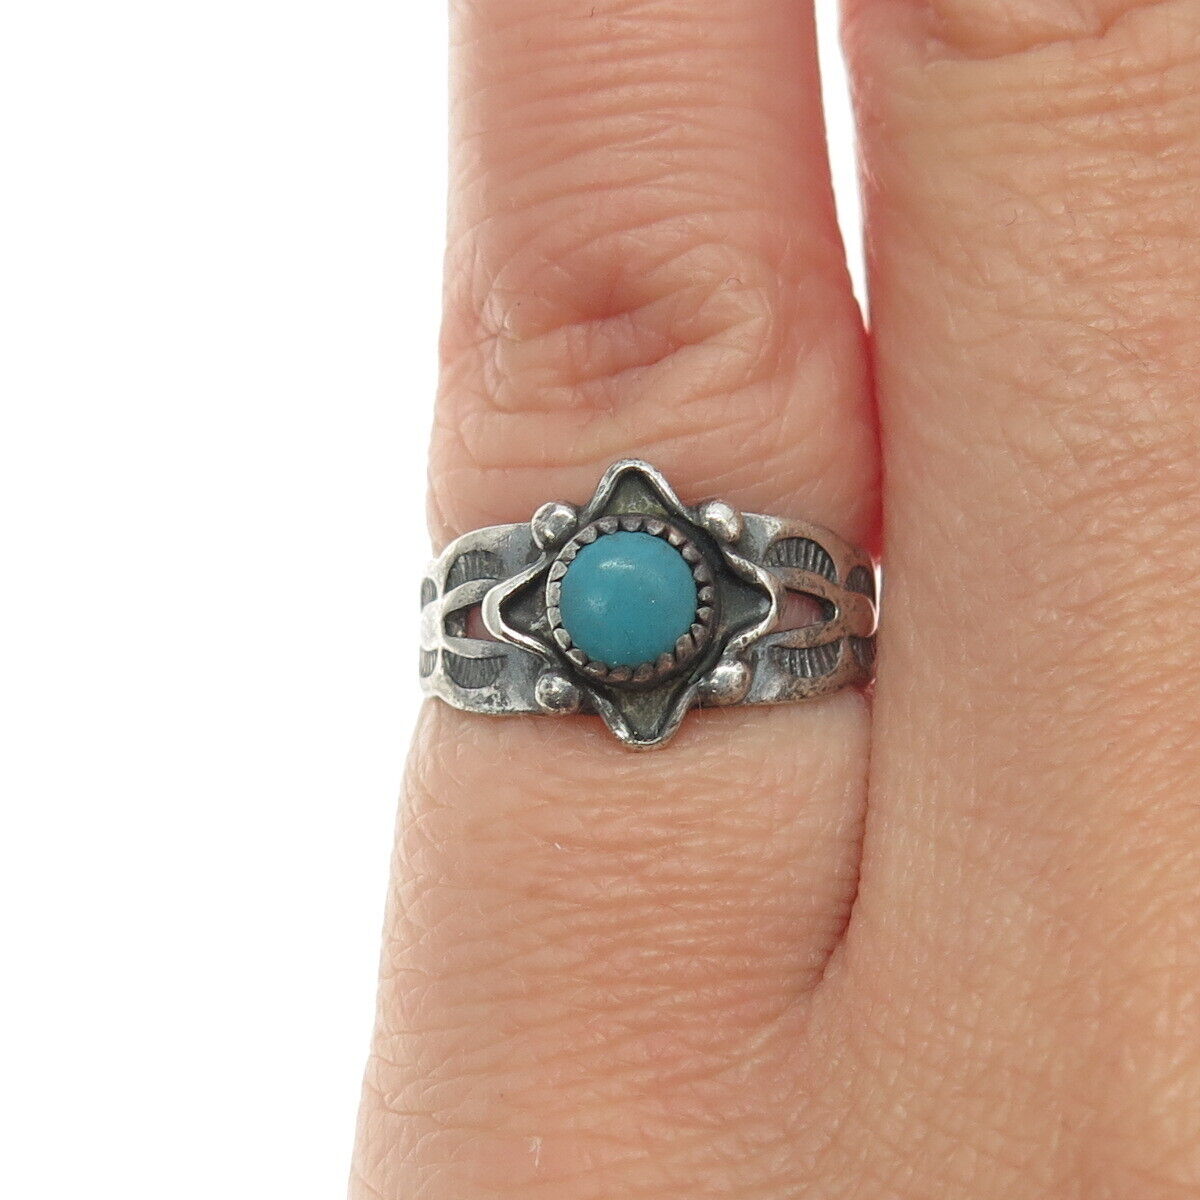 BELL TRADING POST Old Pawn Sterling Silver Vintage Bisbee Turquoise Ring Size 4